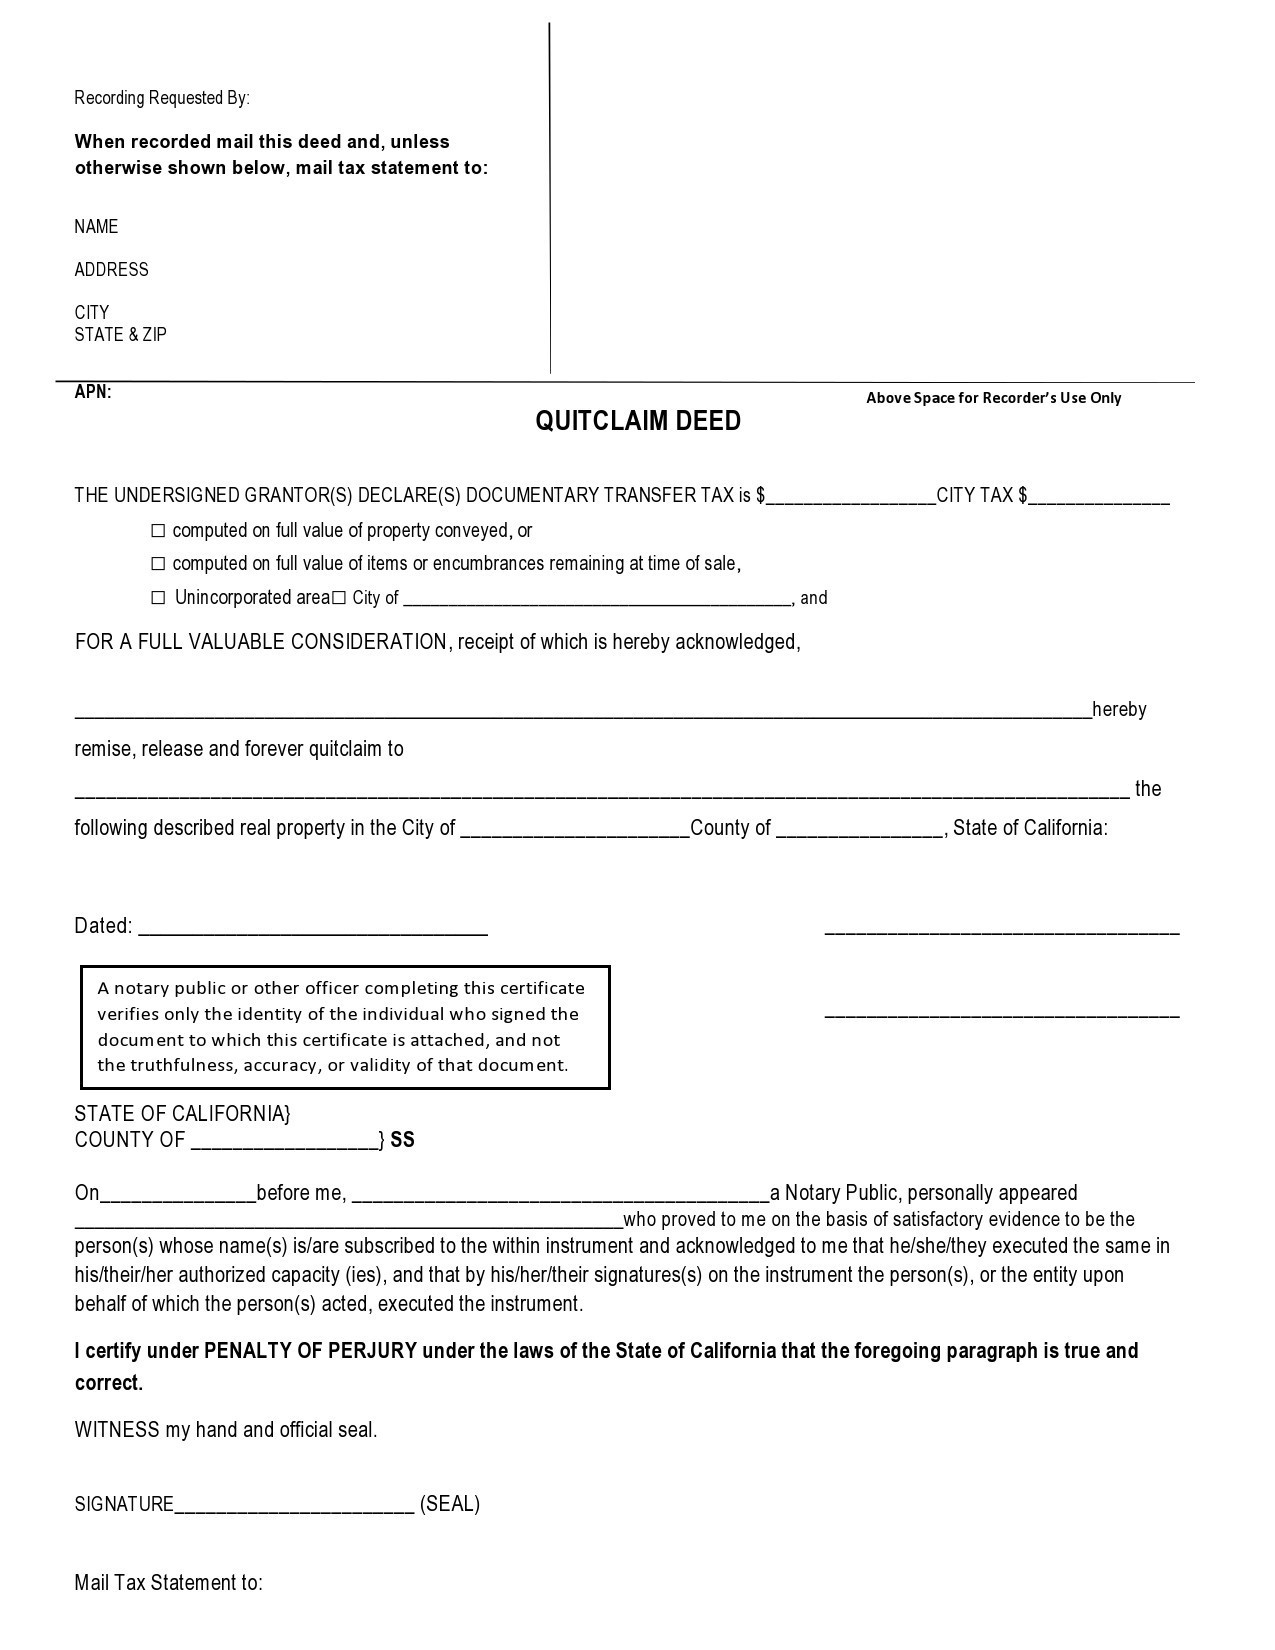 Free quit claim deed form 30